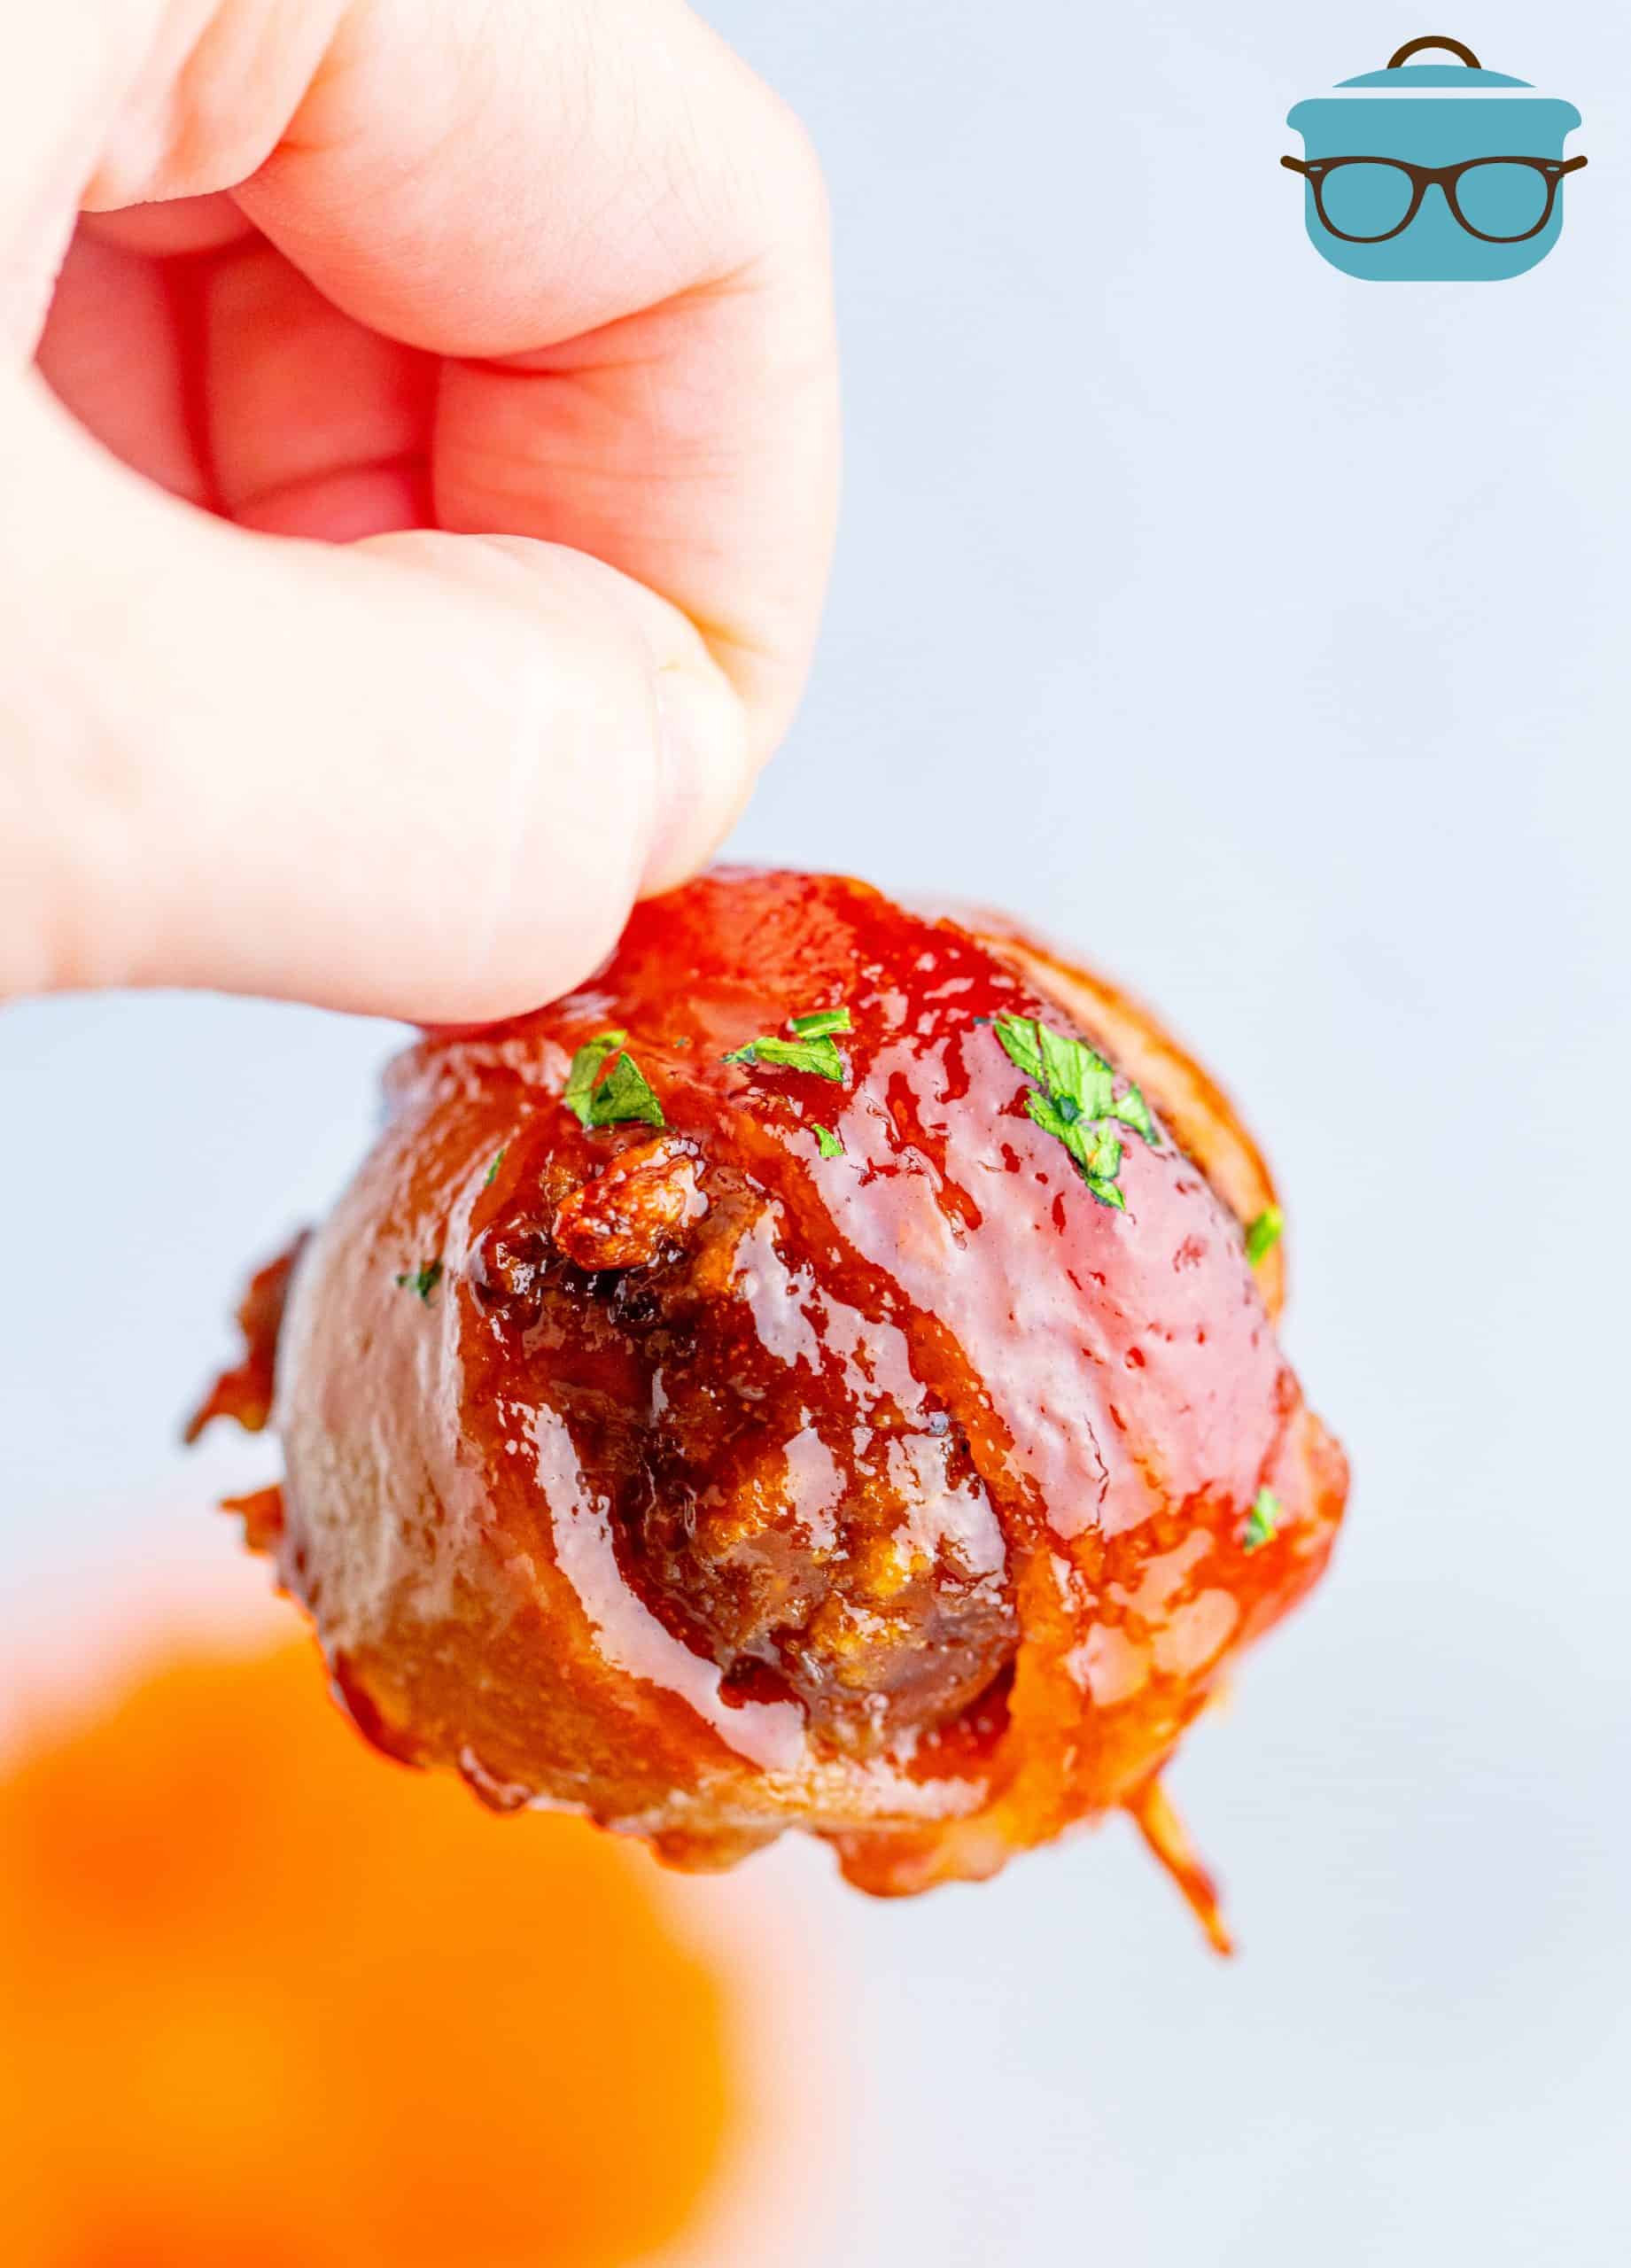 Hand holding up one Bacon Wrapped Meatball.